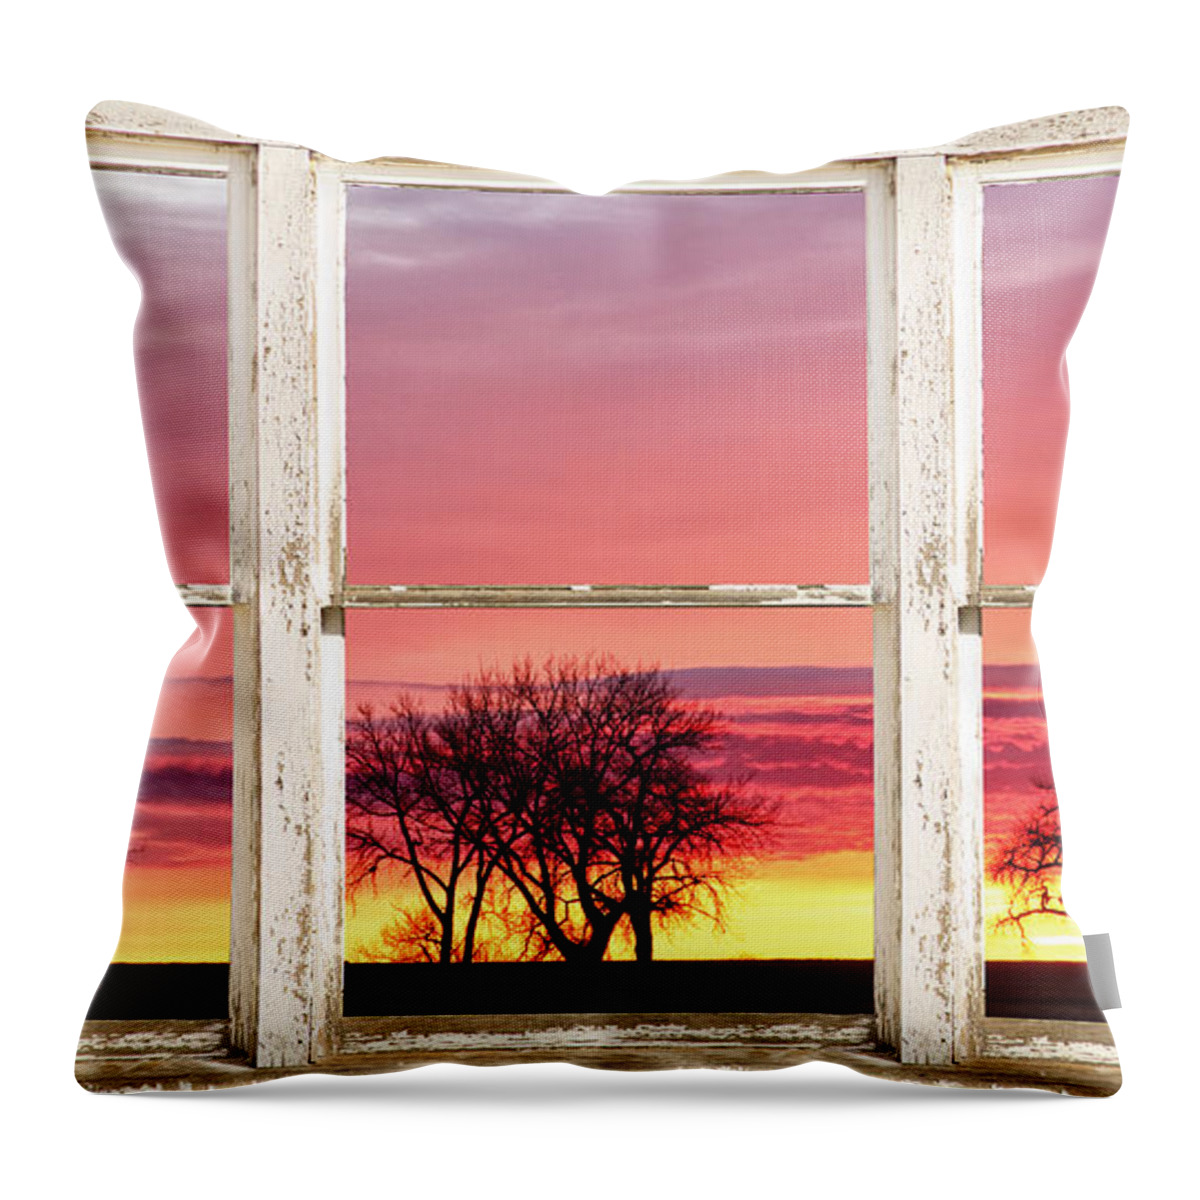 Windows Throw Pillow featuring the photograph Colorful Tree Lined Horizon White Barn Picture Window Frame by James BO Insogna